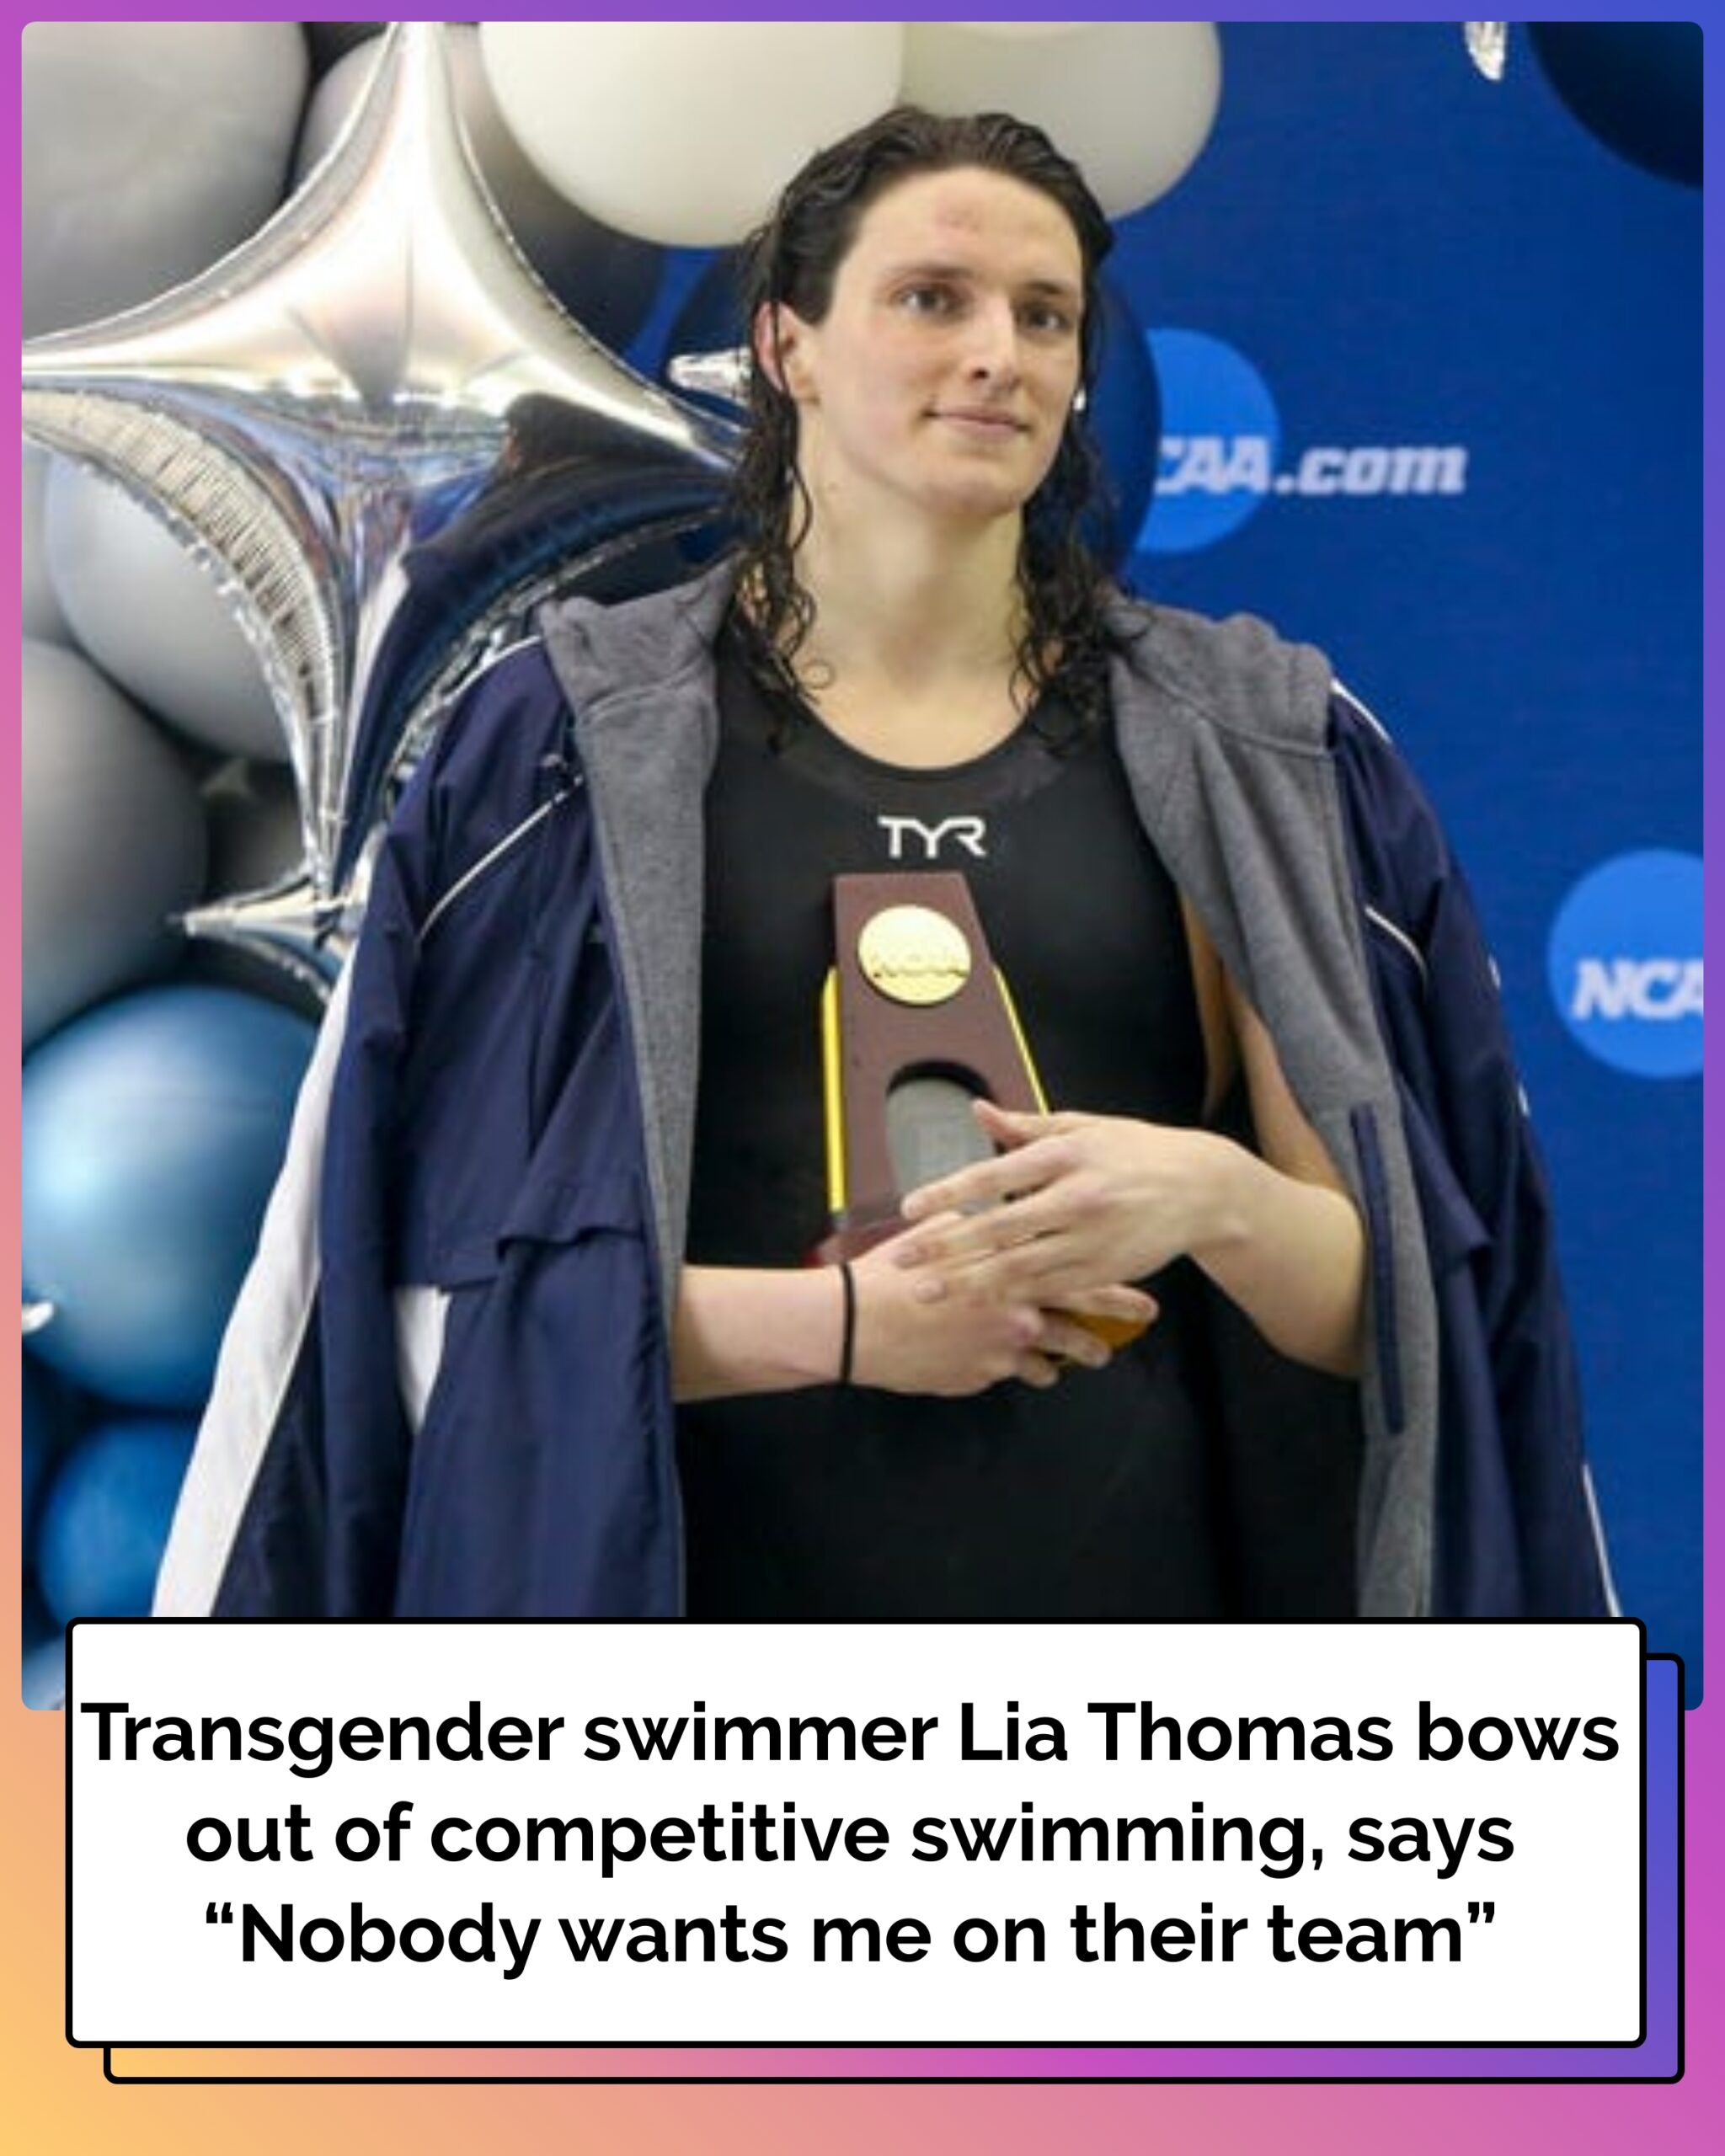 Lia Thomas Leaves Competitive Swimming Citing Emotional Turmoil and Isolation